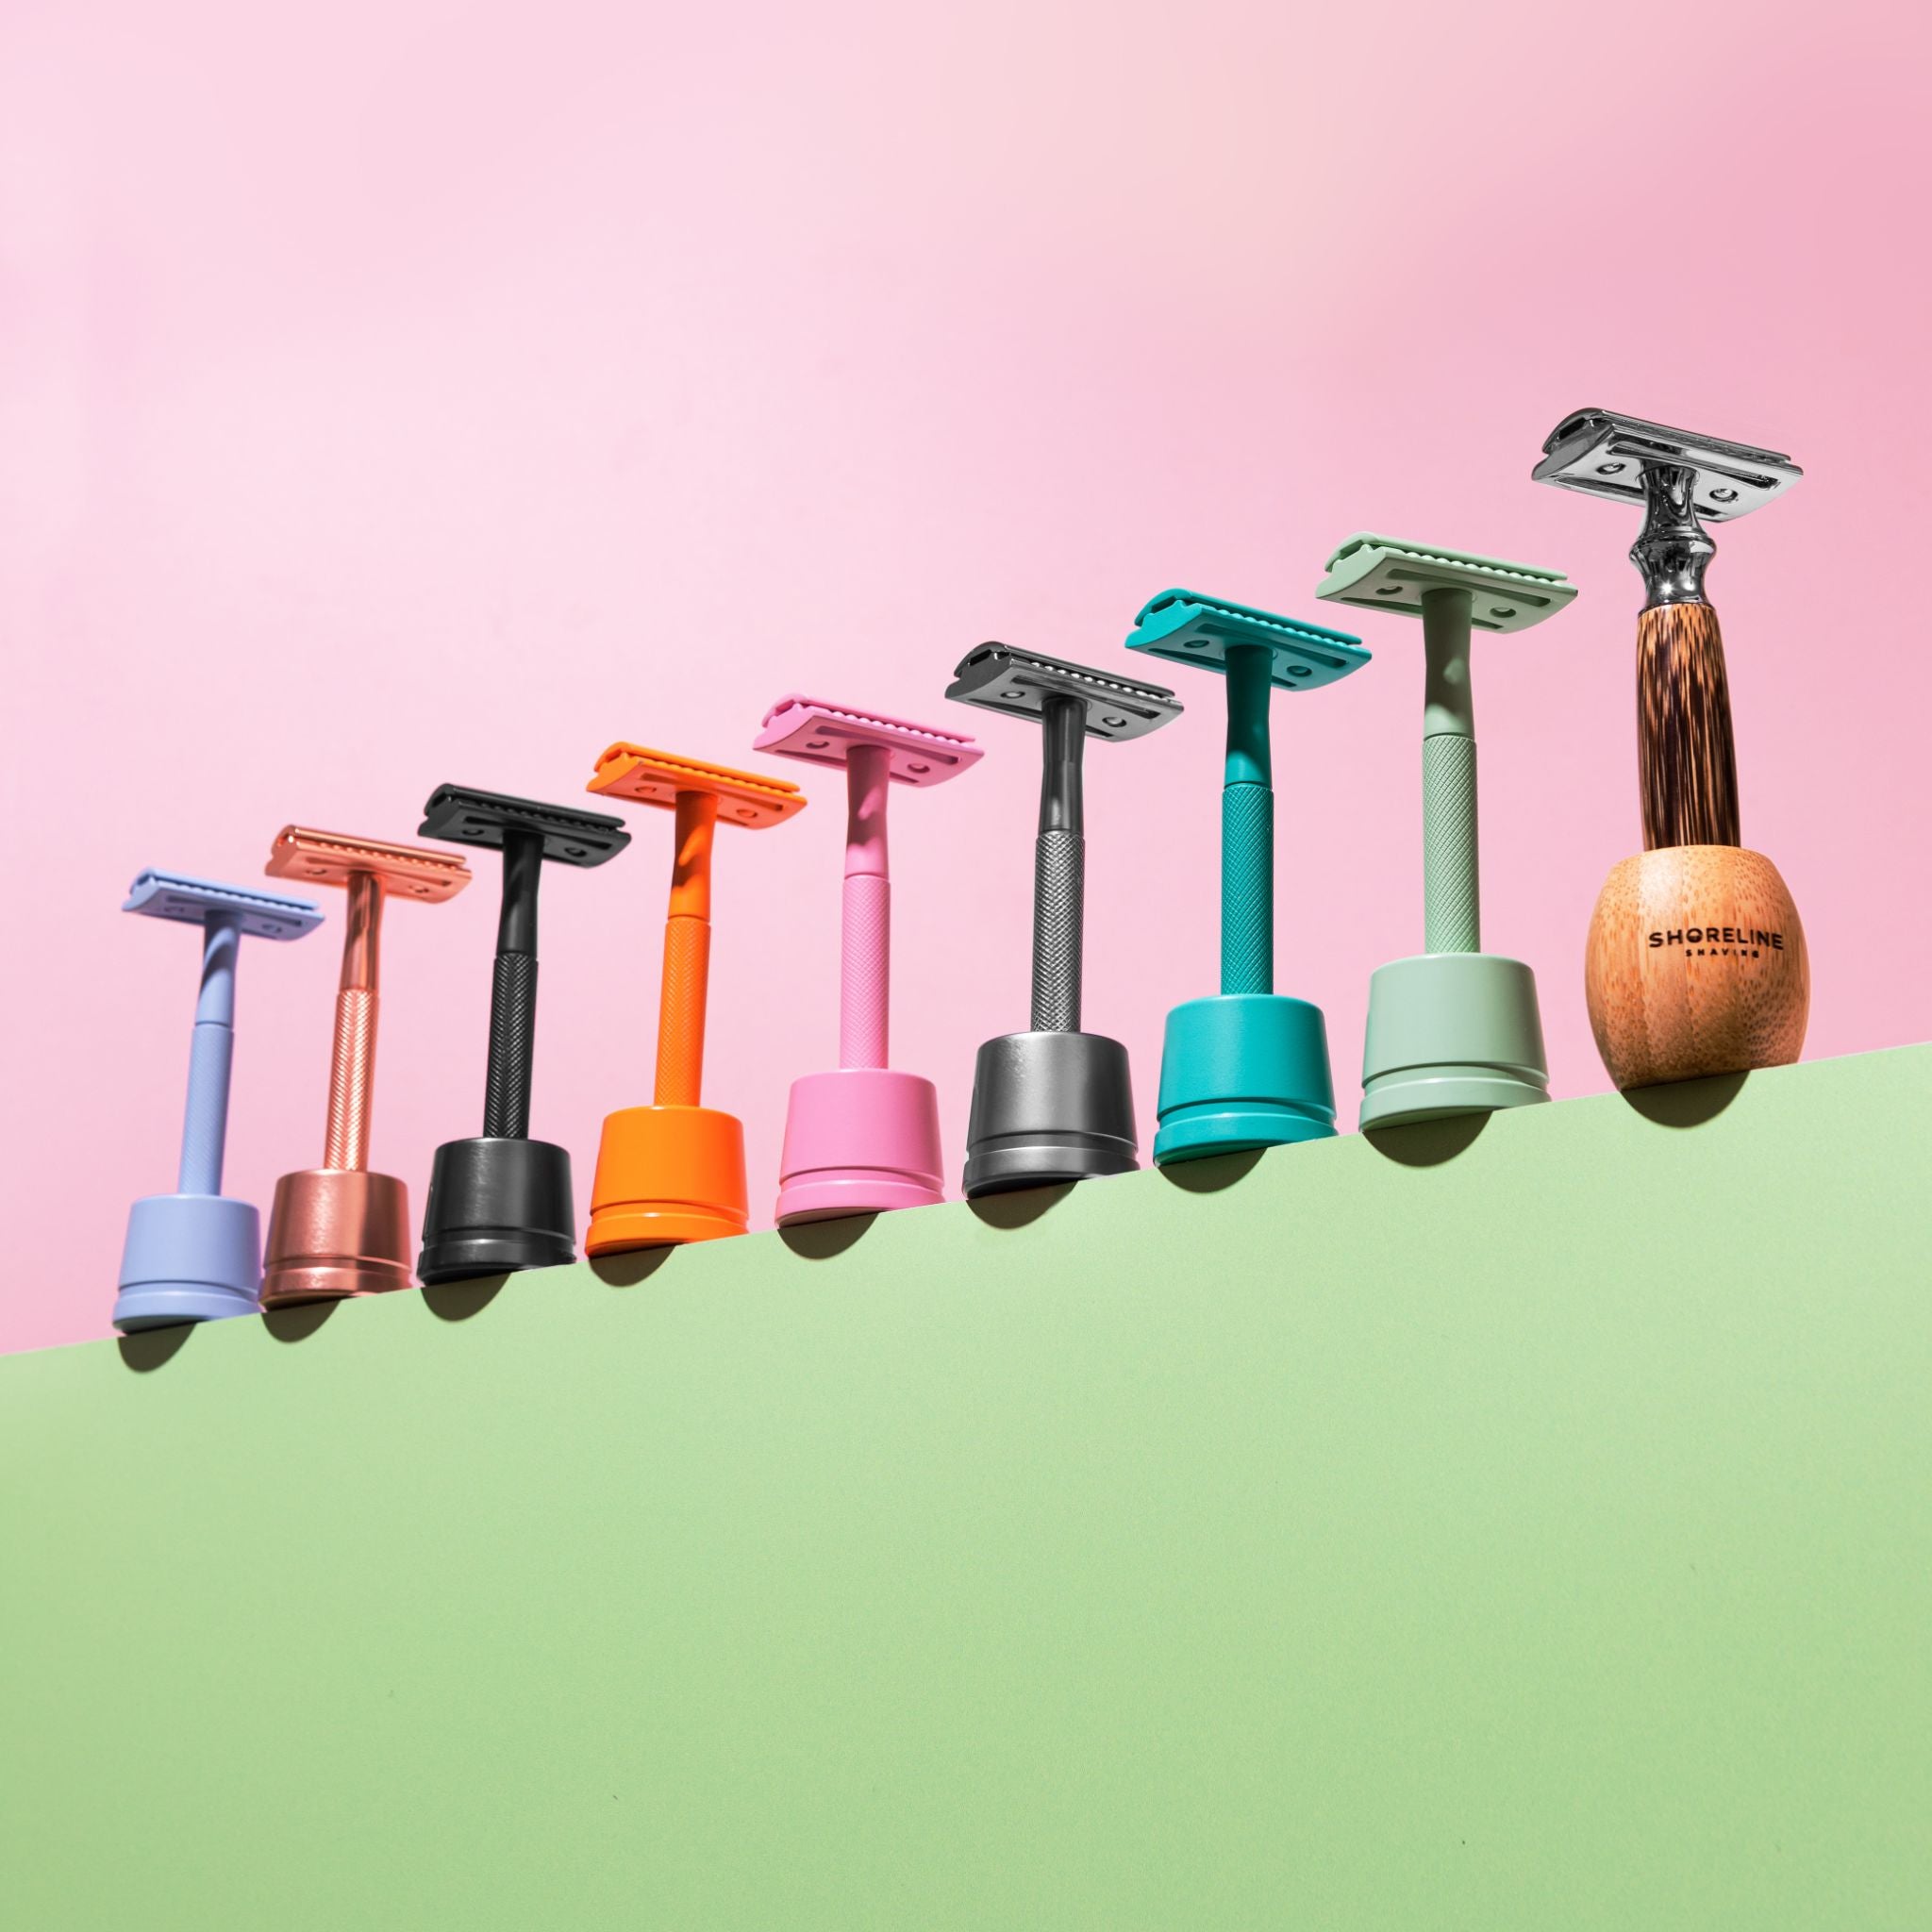 Multi-coloured safety razors in razor stands, lined up on a green base and a pink background - Shoreline Shaving